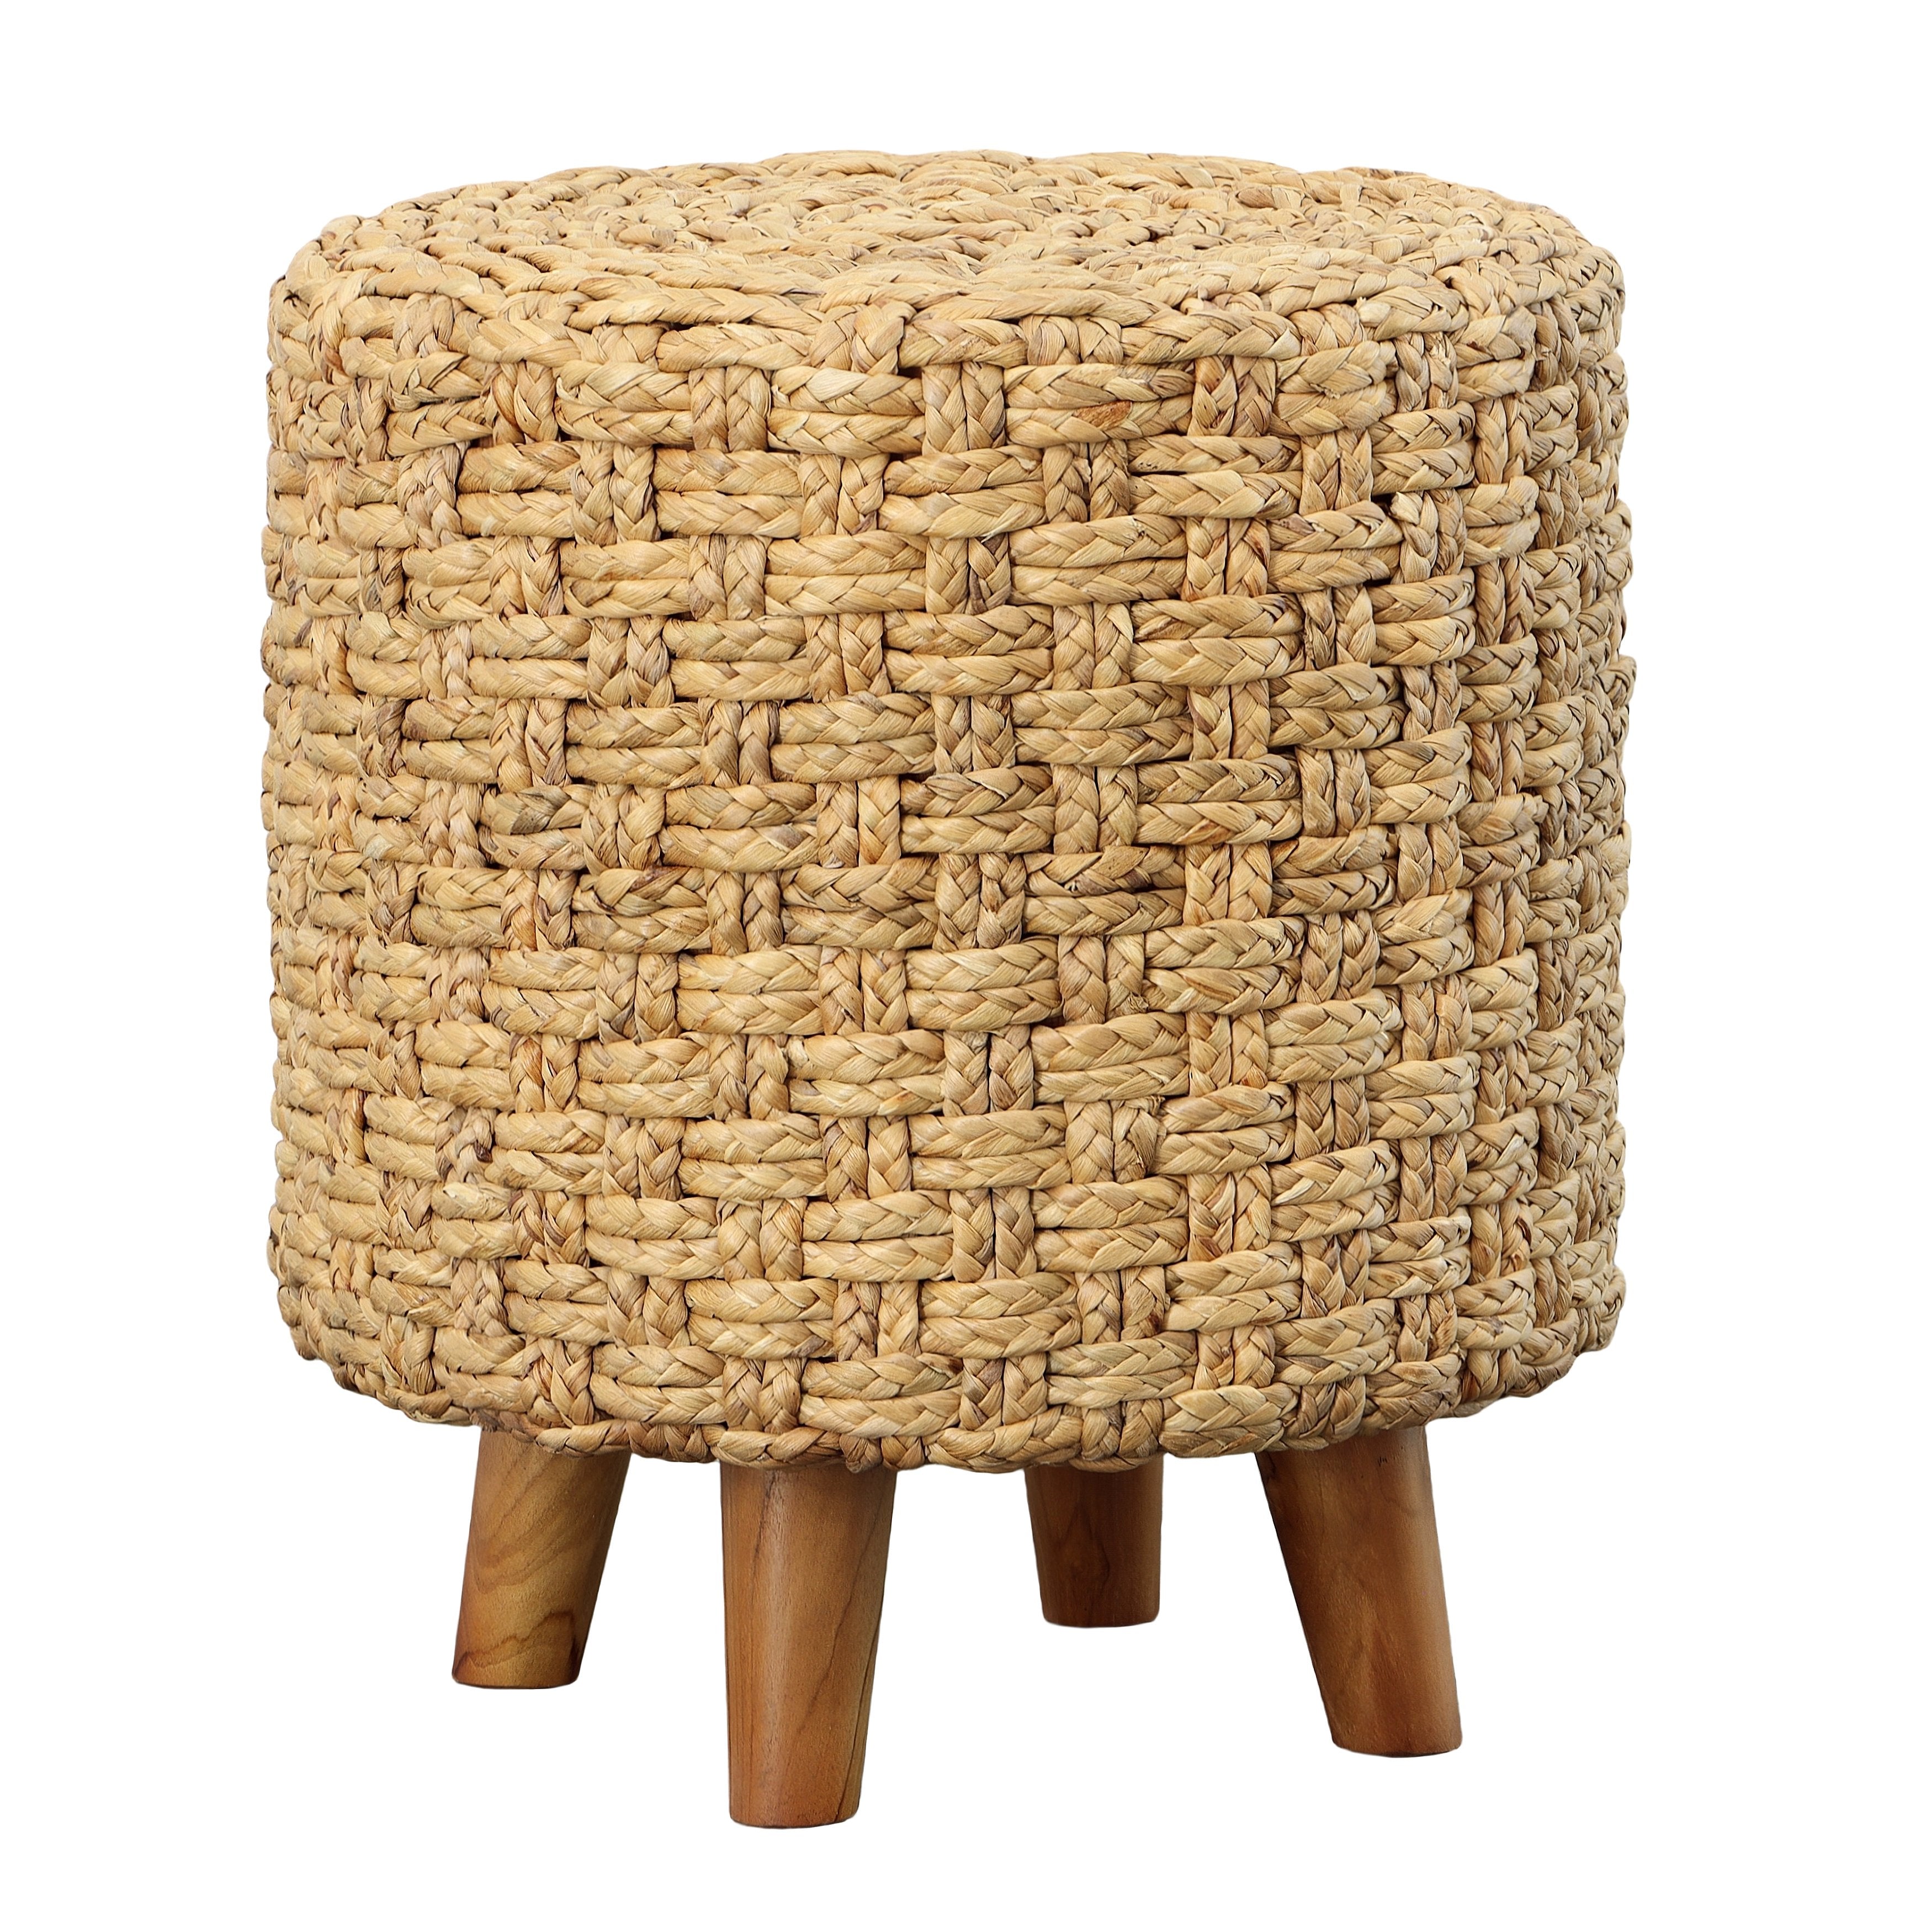 The Esposito Stool is a luxurious piece of furniture crafted from premium teak wood with a braided waterhyacinth construction, finished with a natural finish for effortless elegance. Its sturdy frame and ergonomic design makes it the perfect addition to any living room or outdoor space. Amethyst Home provides interior design, new home construction design consulting, vintage area rugs, and lighting in the Alpharetta metro area.